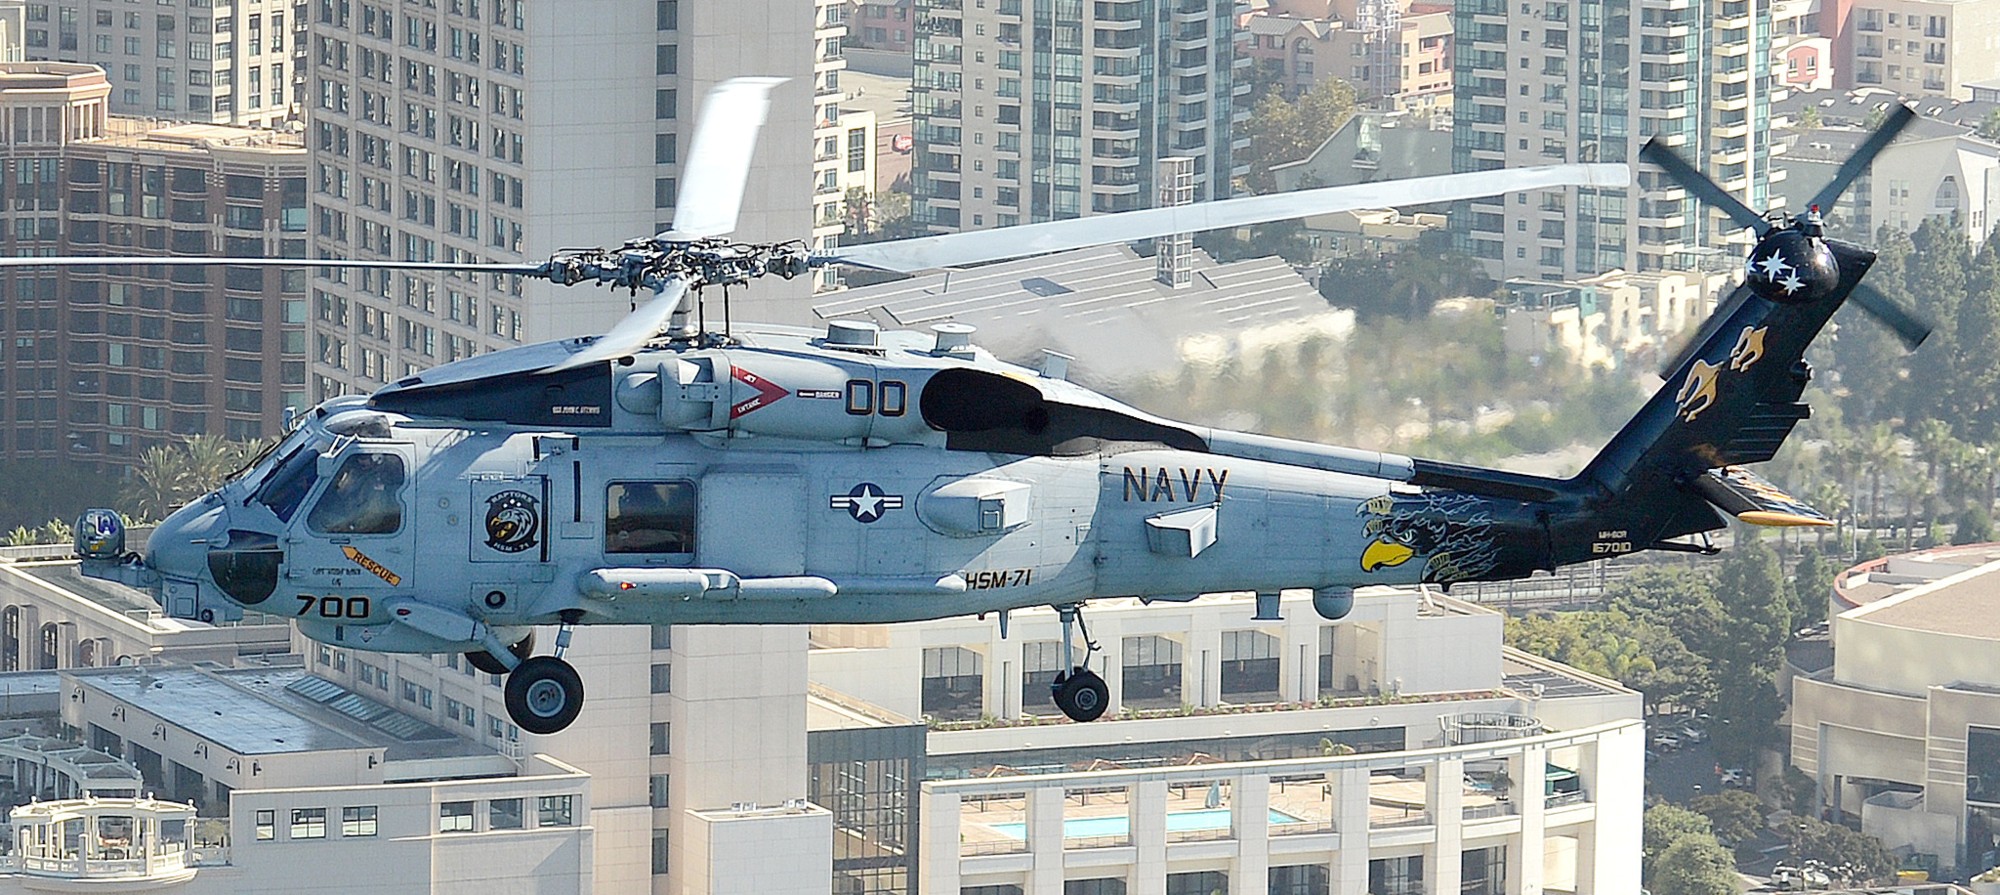 hsm-71 raptors helicopter maritime strike squadron mh-60r seahawk navy 2014 61